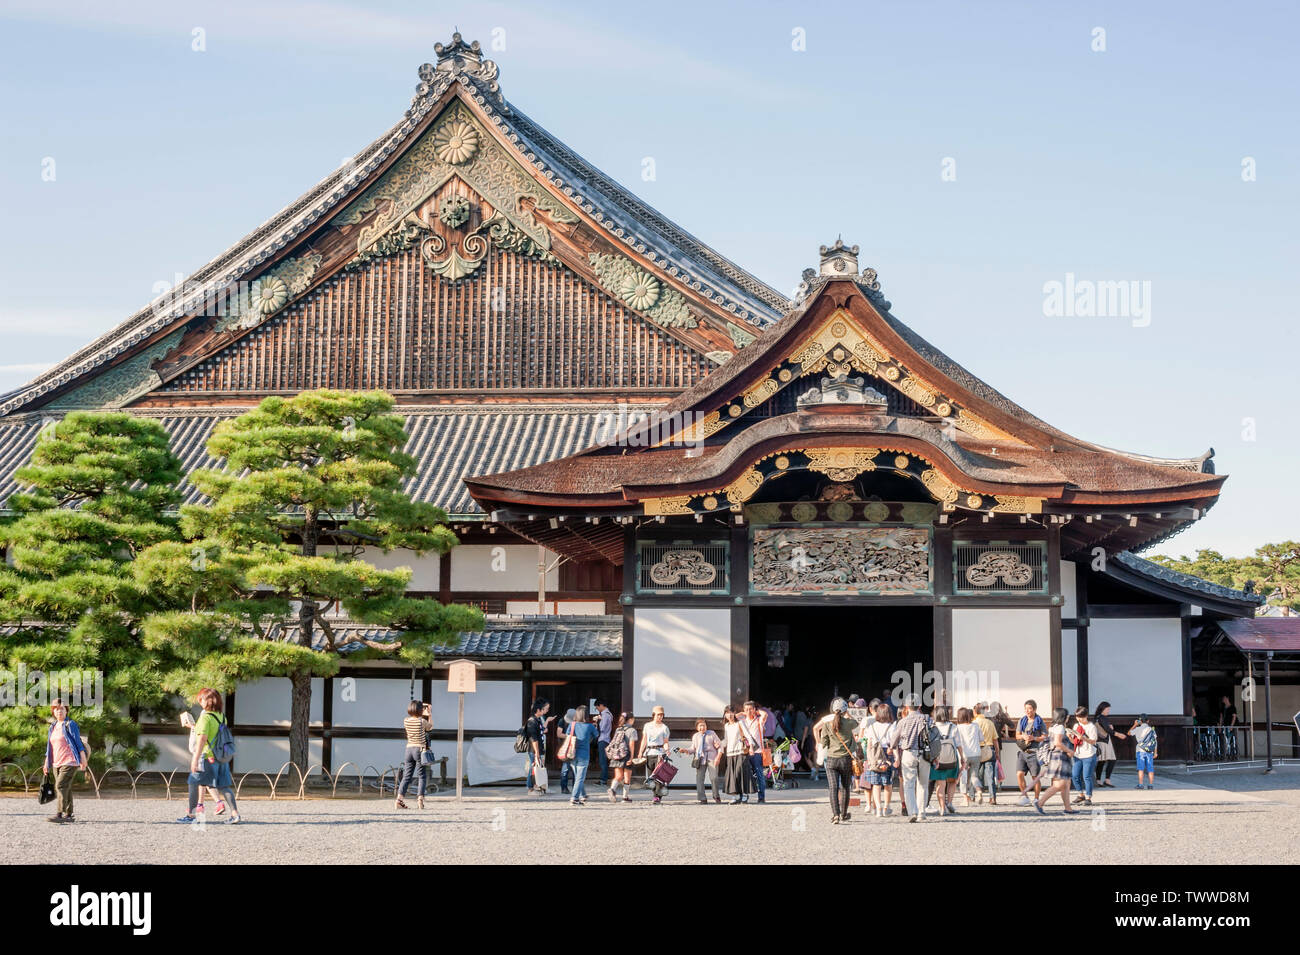 Tourists enter and leave through the entrance door of the Ninomaru Palace, part of the  Nijo castle complex, Kyoto, Japan Stock Photo